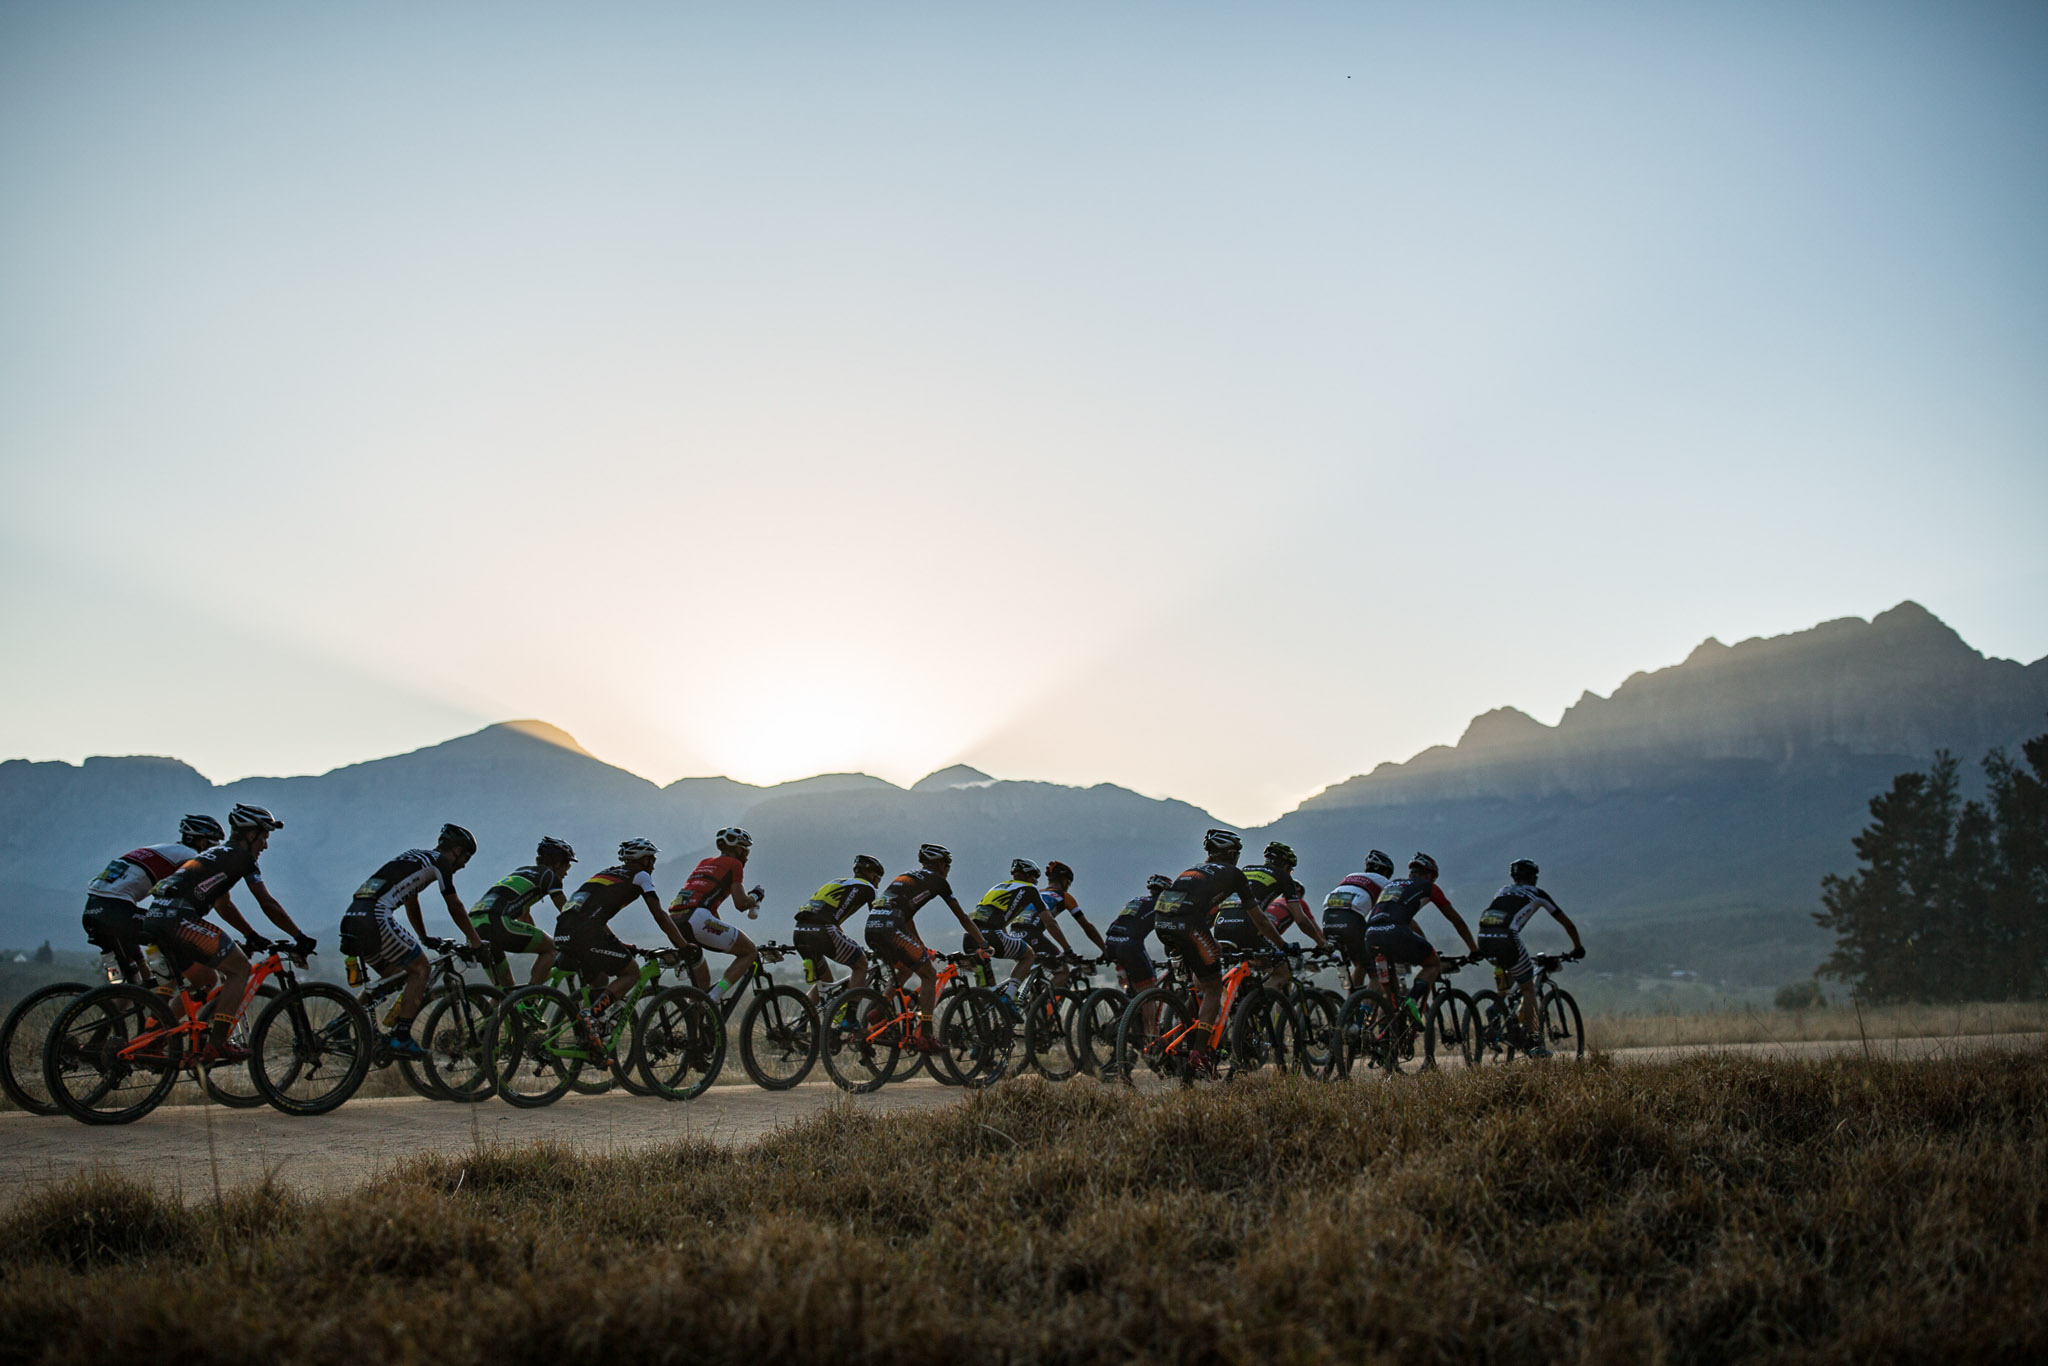 The leading bunch during stage 4 of the 2016 Absa Cape Epic Mountain Bike stage race from the Cape Peninsula University of Technology in Wellington, South Africa on the 17th March 2016 Photo by Nick Muzik/Cape Epic/SPORTZPICS PLEASE ENSURE THE APPROPRIATE CREDIT IS GIVEN TO THE PHOTOGRAPHER AND SPORTZPICS ALONG WITH THE ABSA CAPE EPIC ace2016